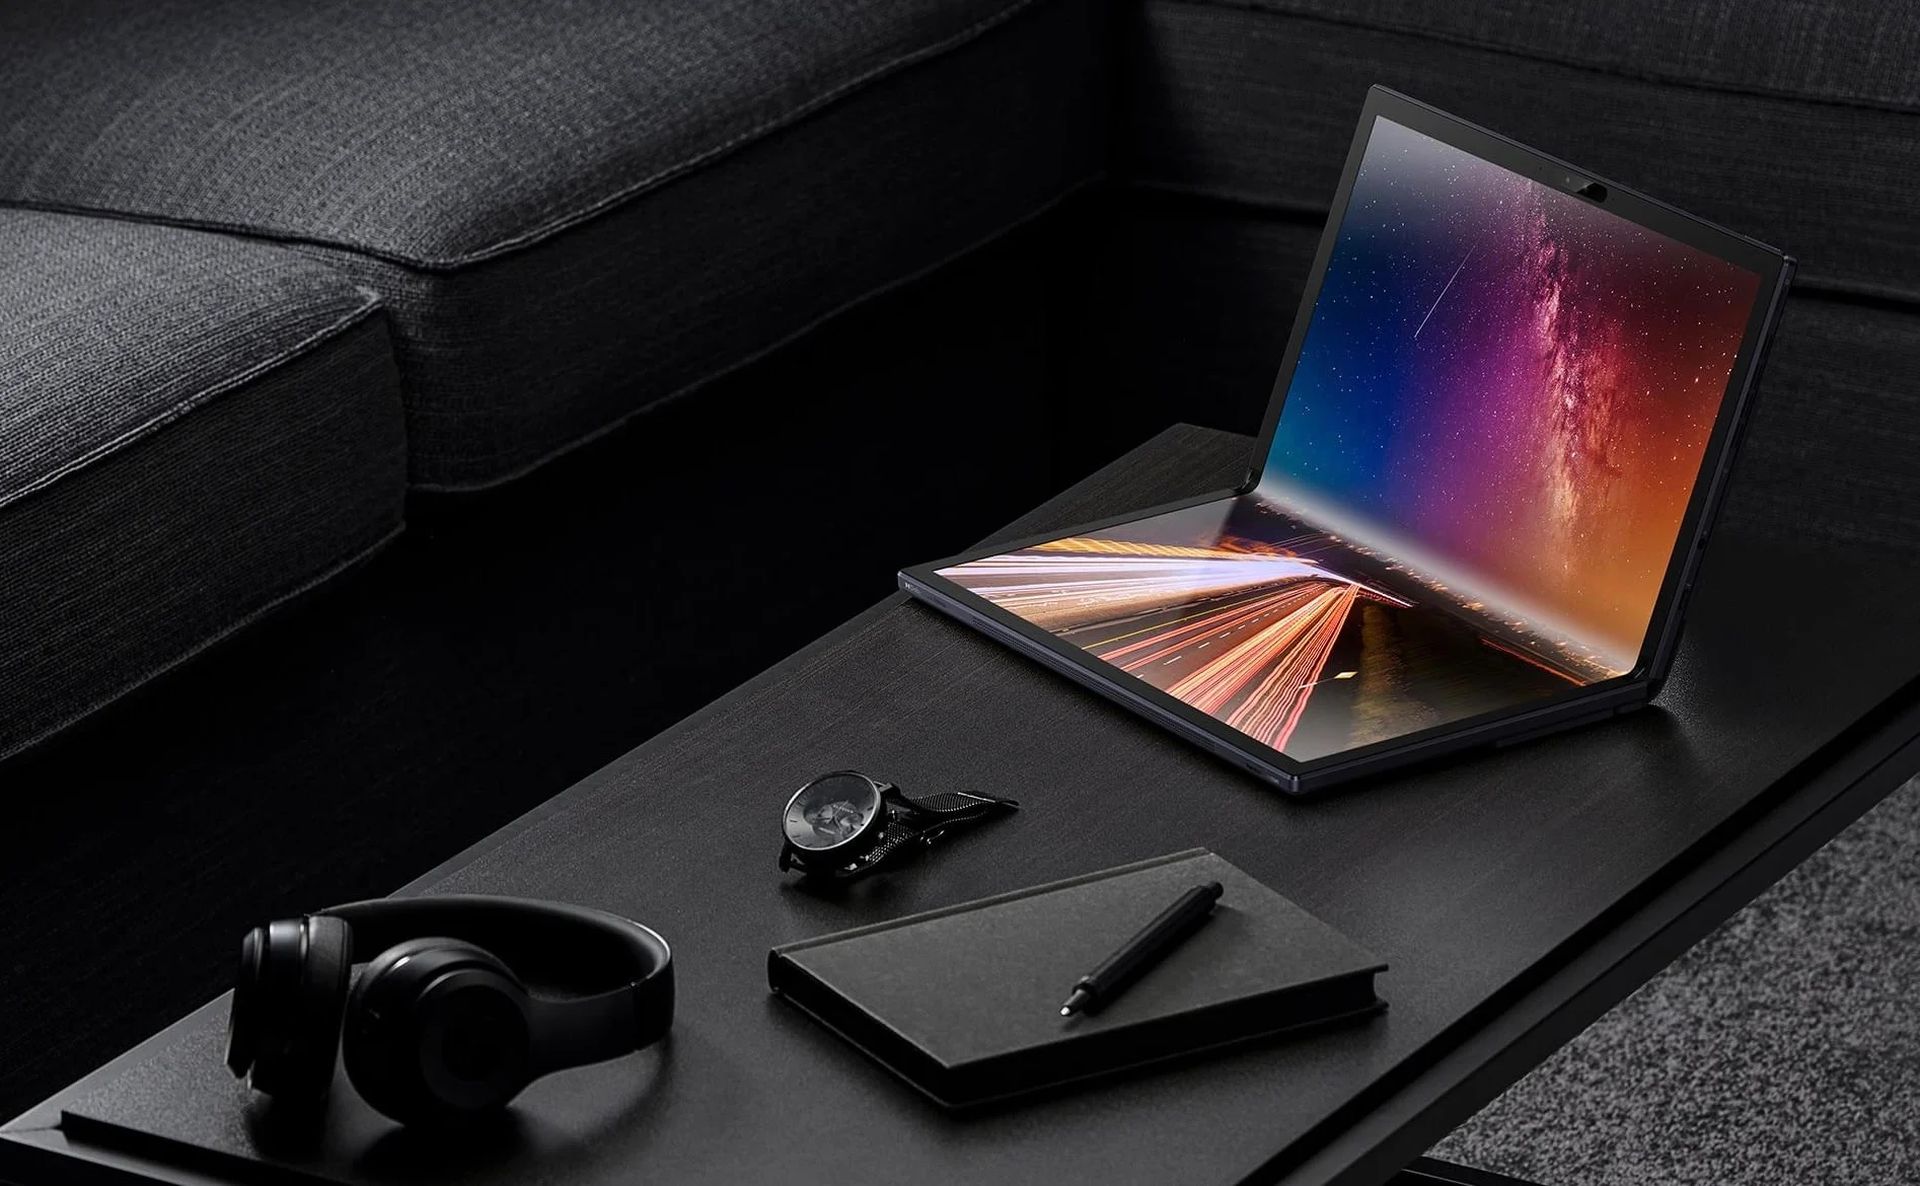 Recently, Asus unveiled the Zenbook 17 Fold OLED, a 17.3-inch laptop with two 12.5-inch panels that can be folded in half. We are here to discuss its specs, price and release date!